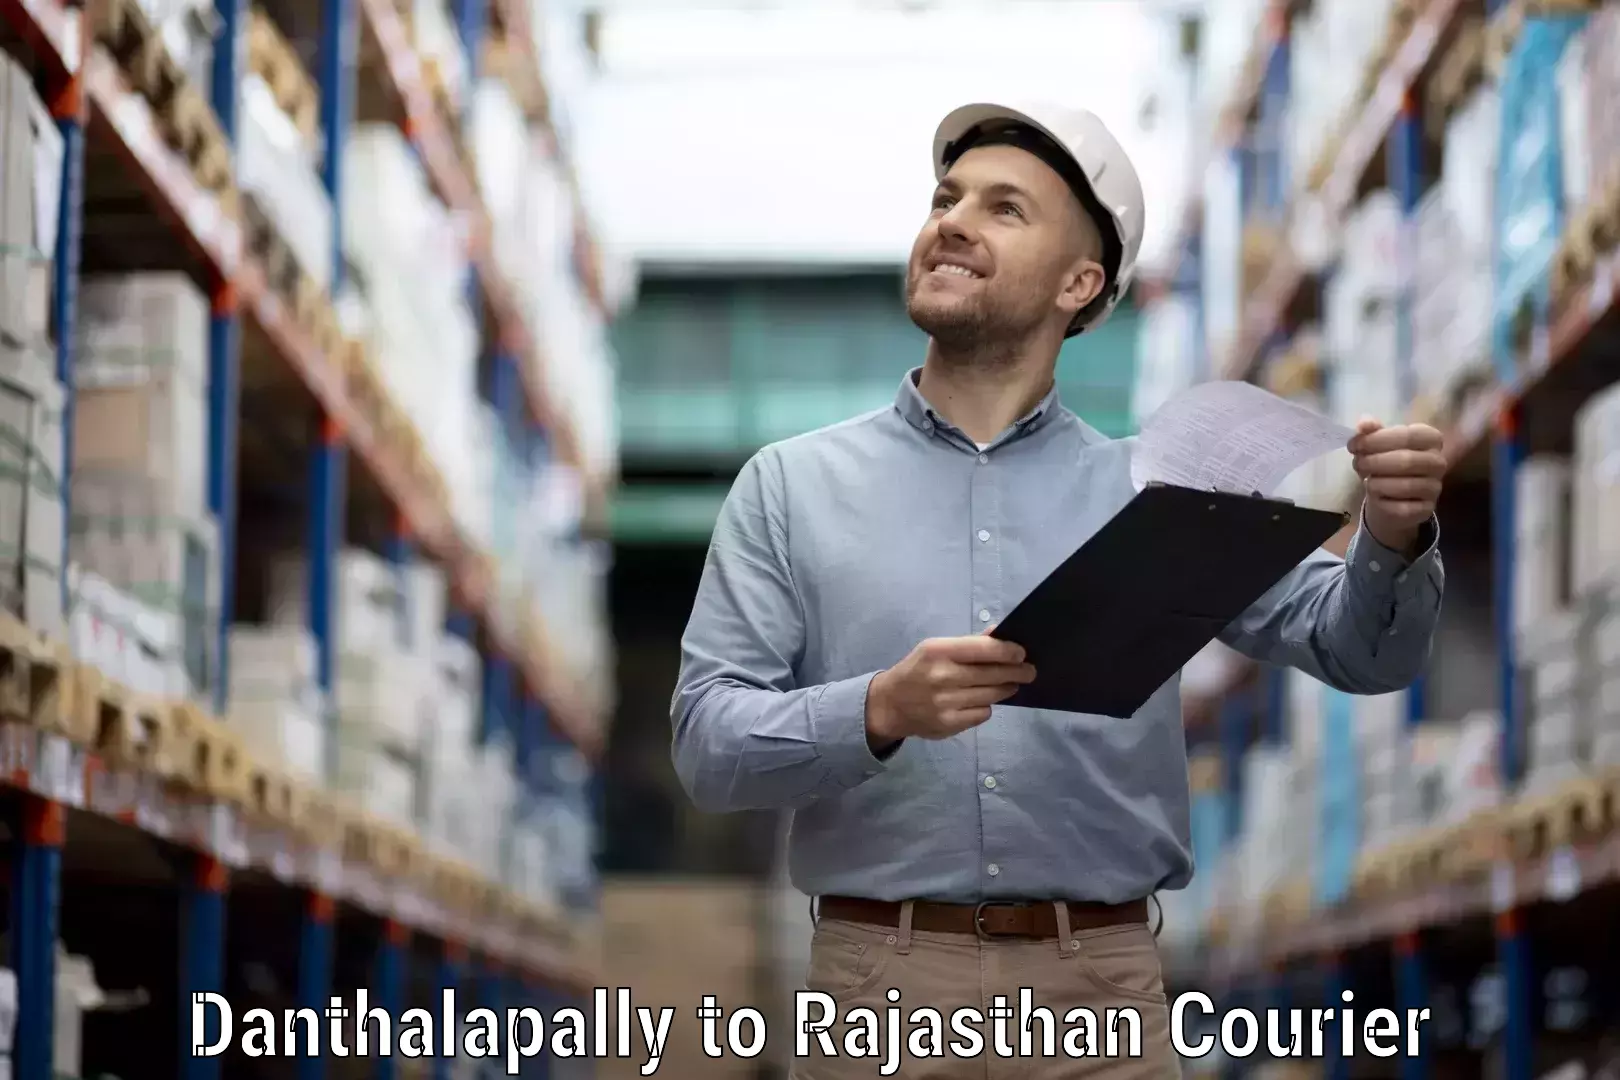 Subscription-based courier Danthalapally to Karauli